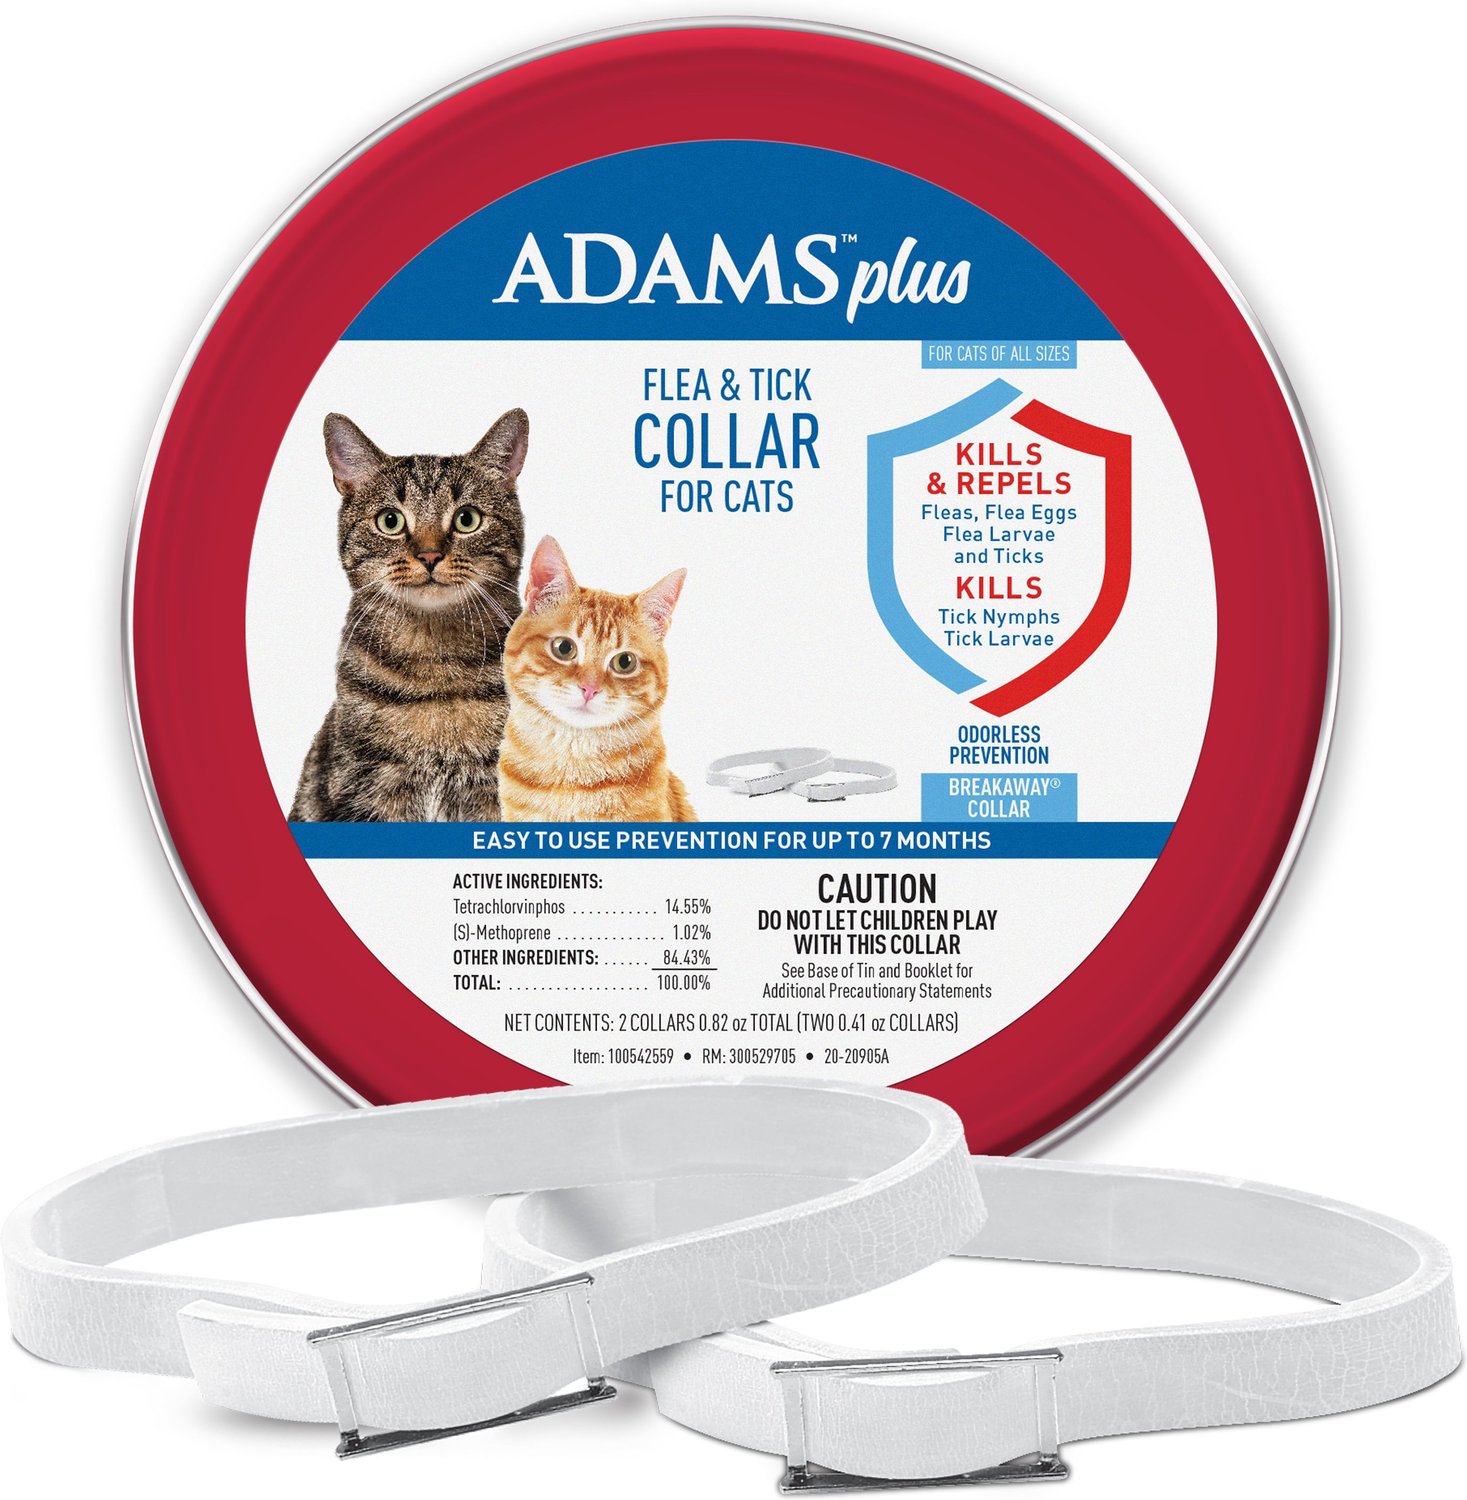 ADAMS Flea & Tick Collar for Cats, 2 Collars (14Months Protection